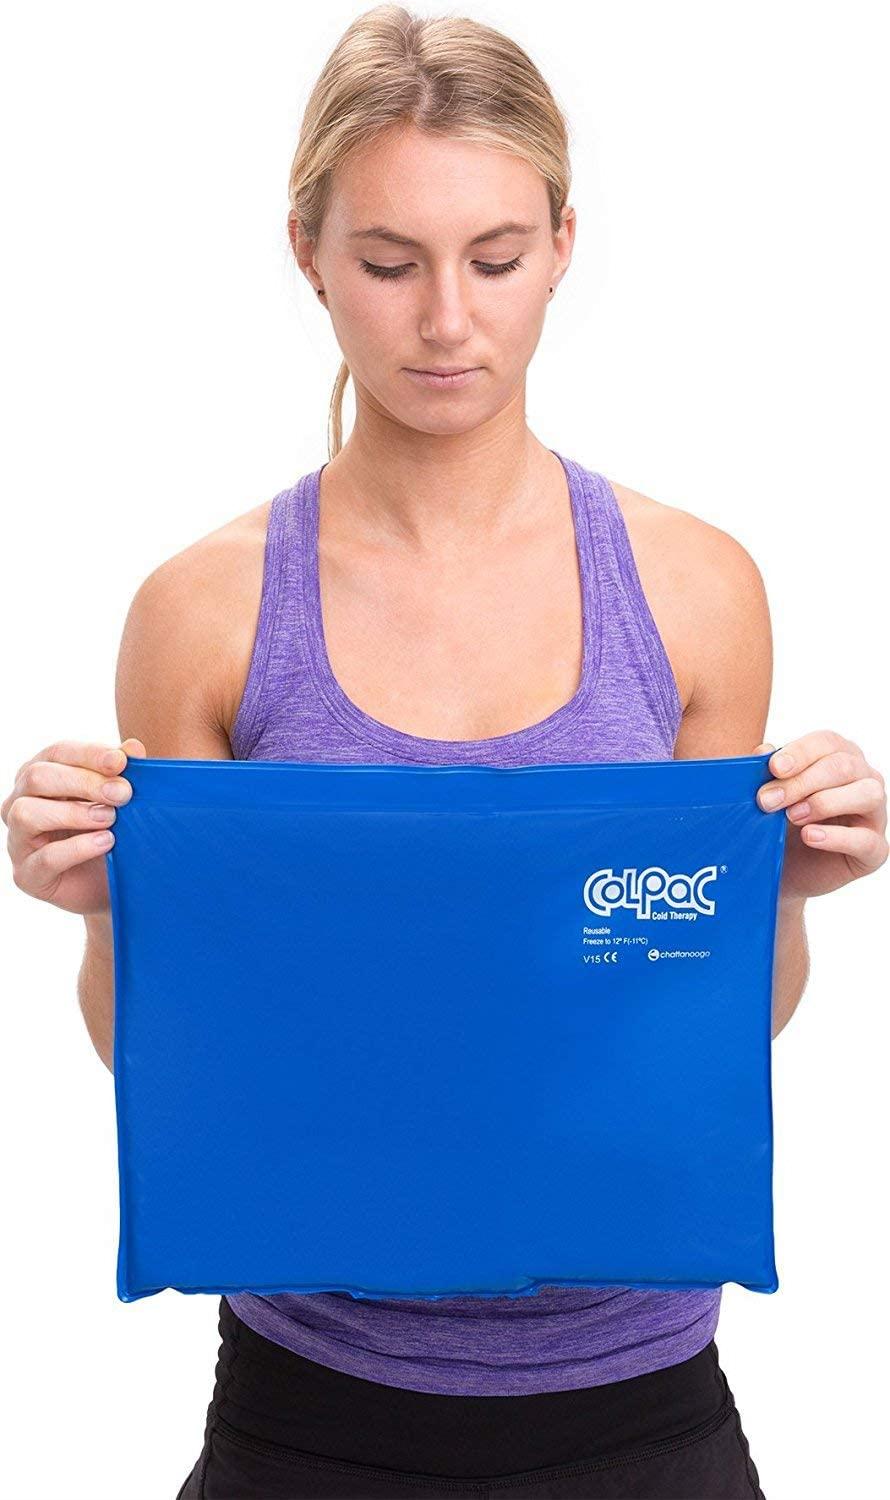 Chattanooga ColPac - Reusable Gel Ice Pack - Oversize Large Ice